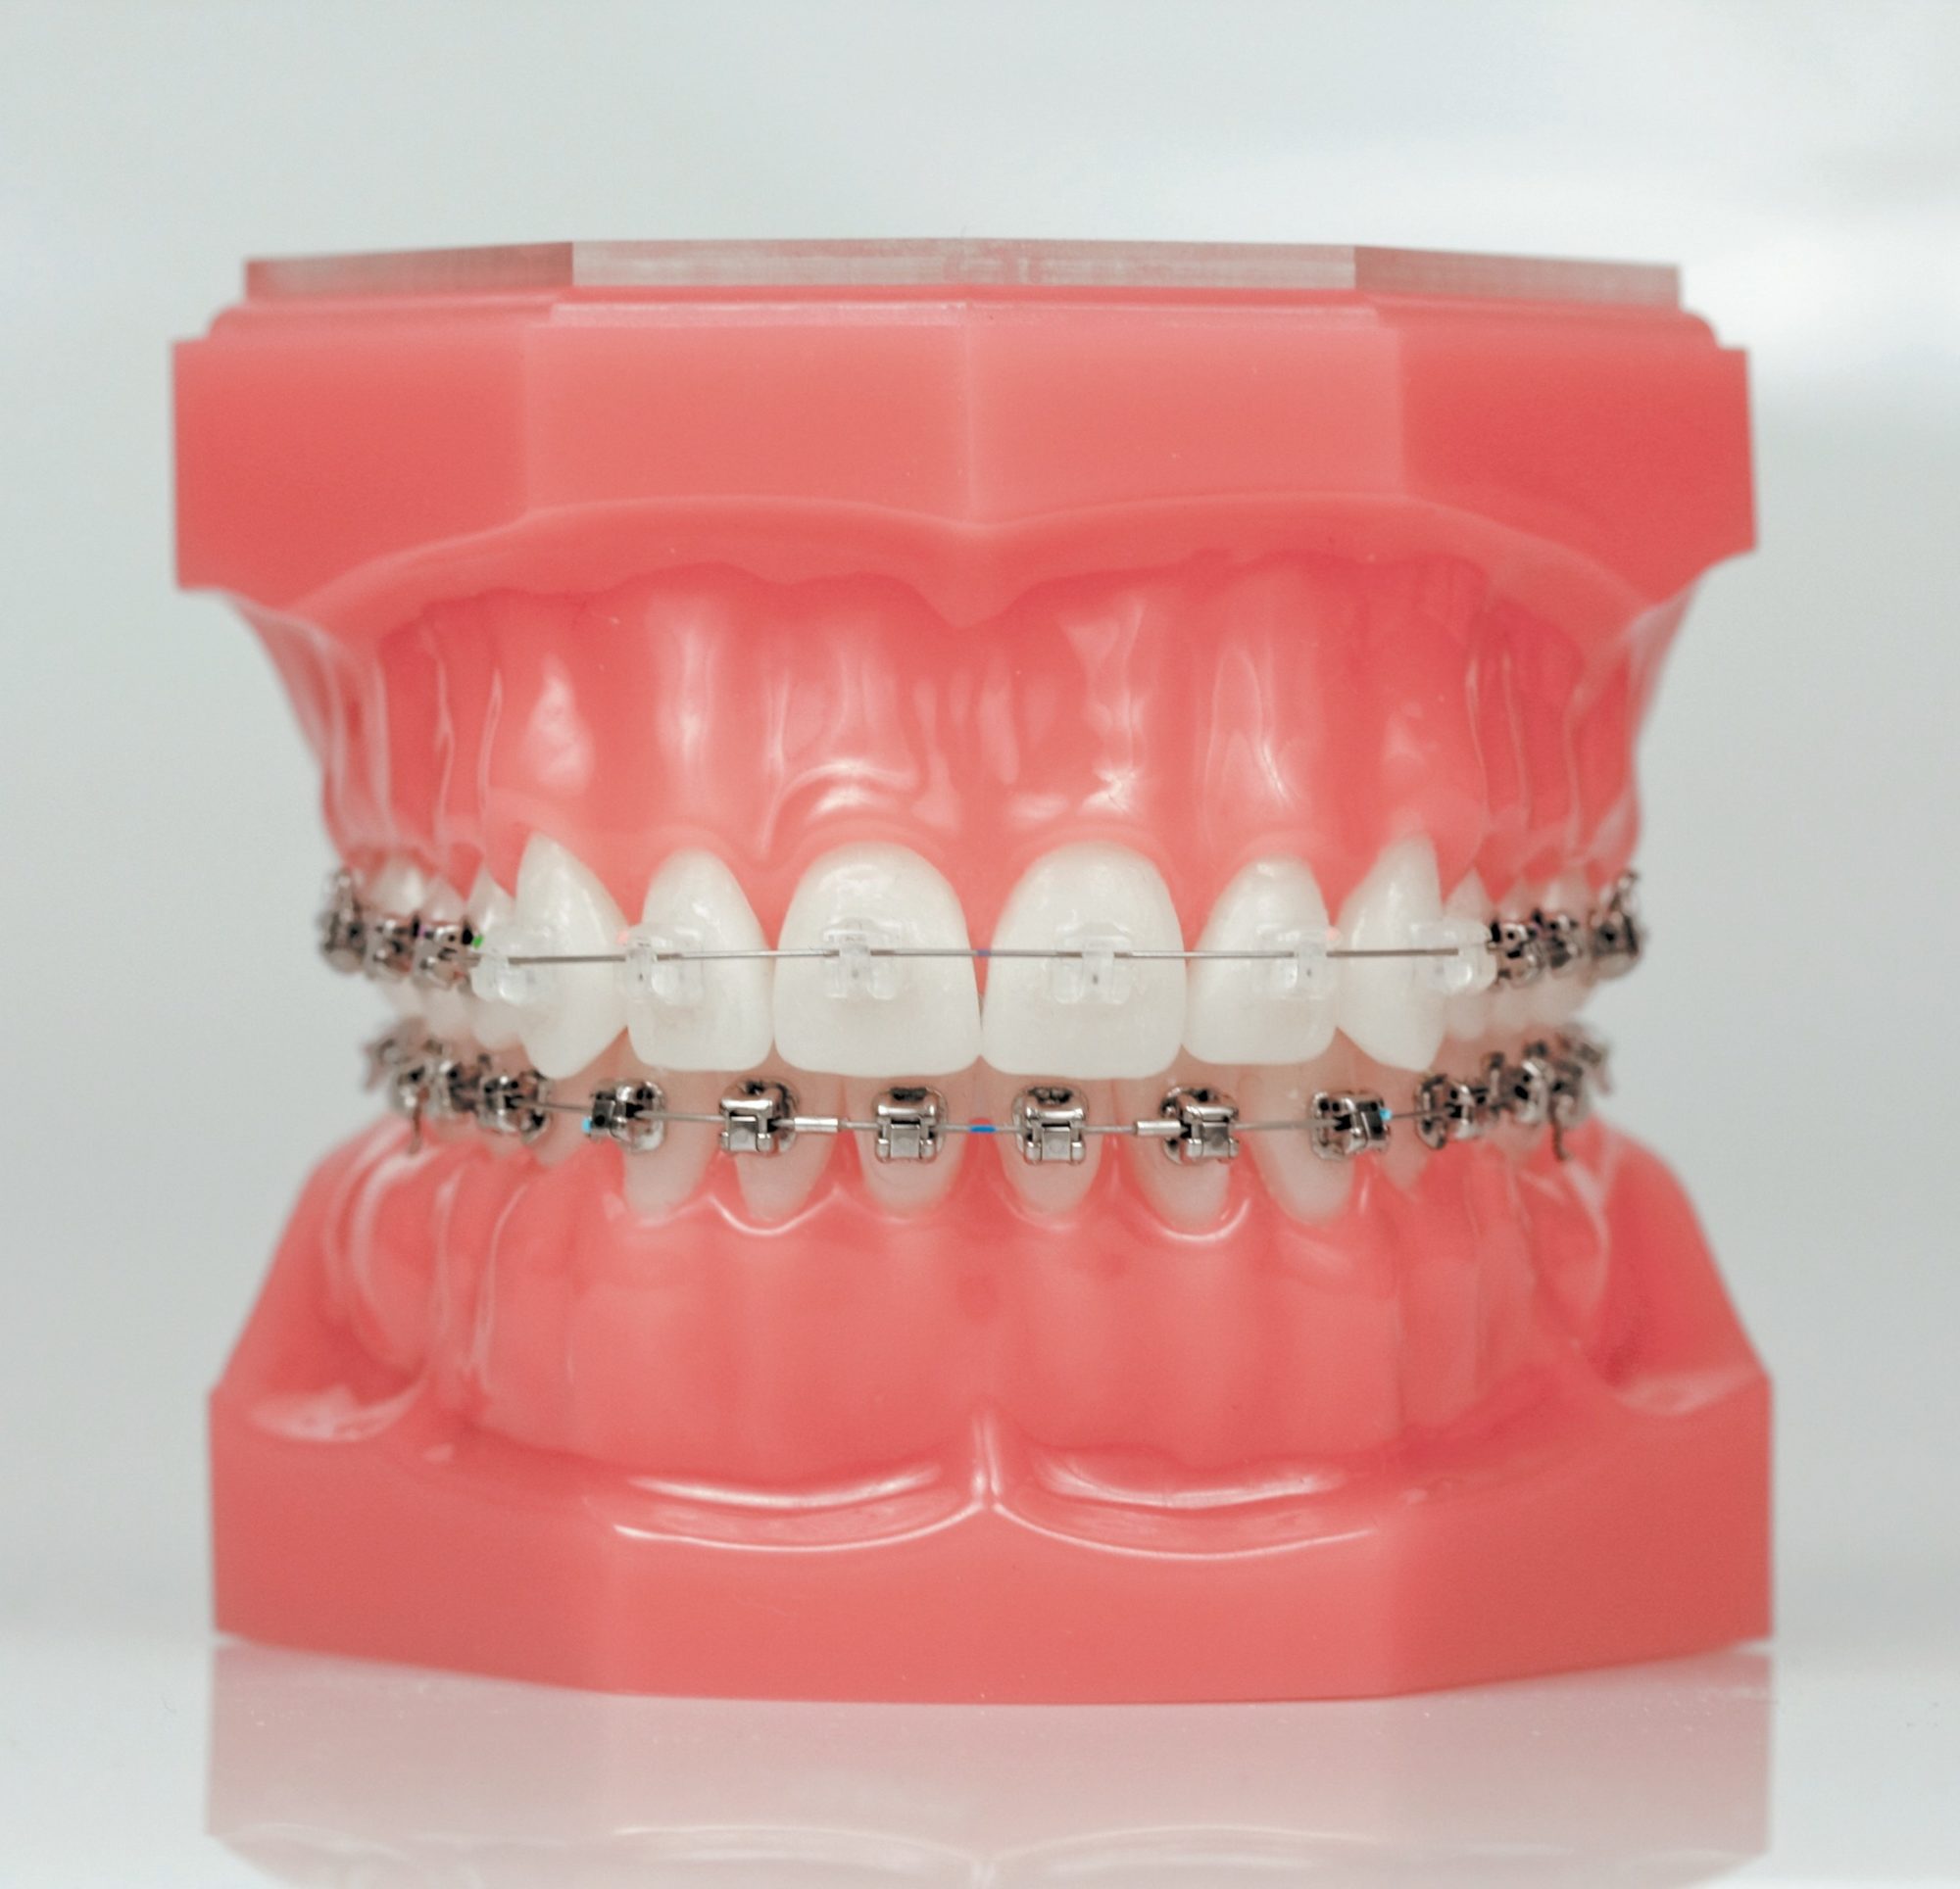 A picture of teeth being displayed with Damon clear braces on the teeth.